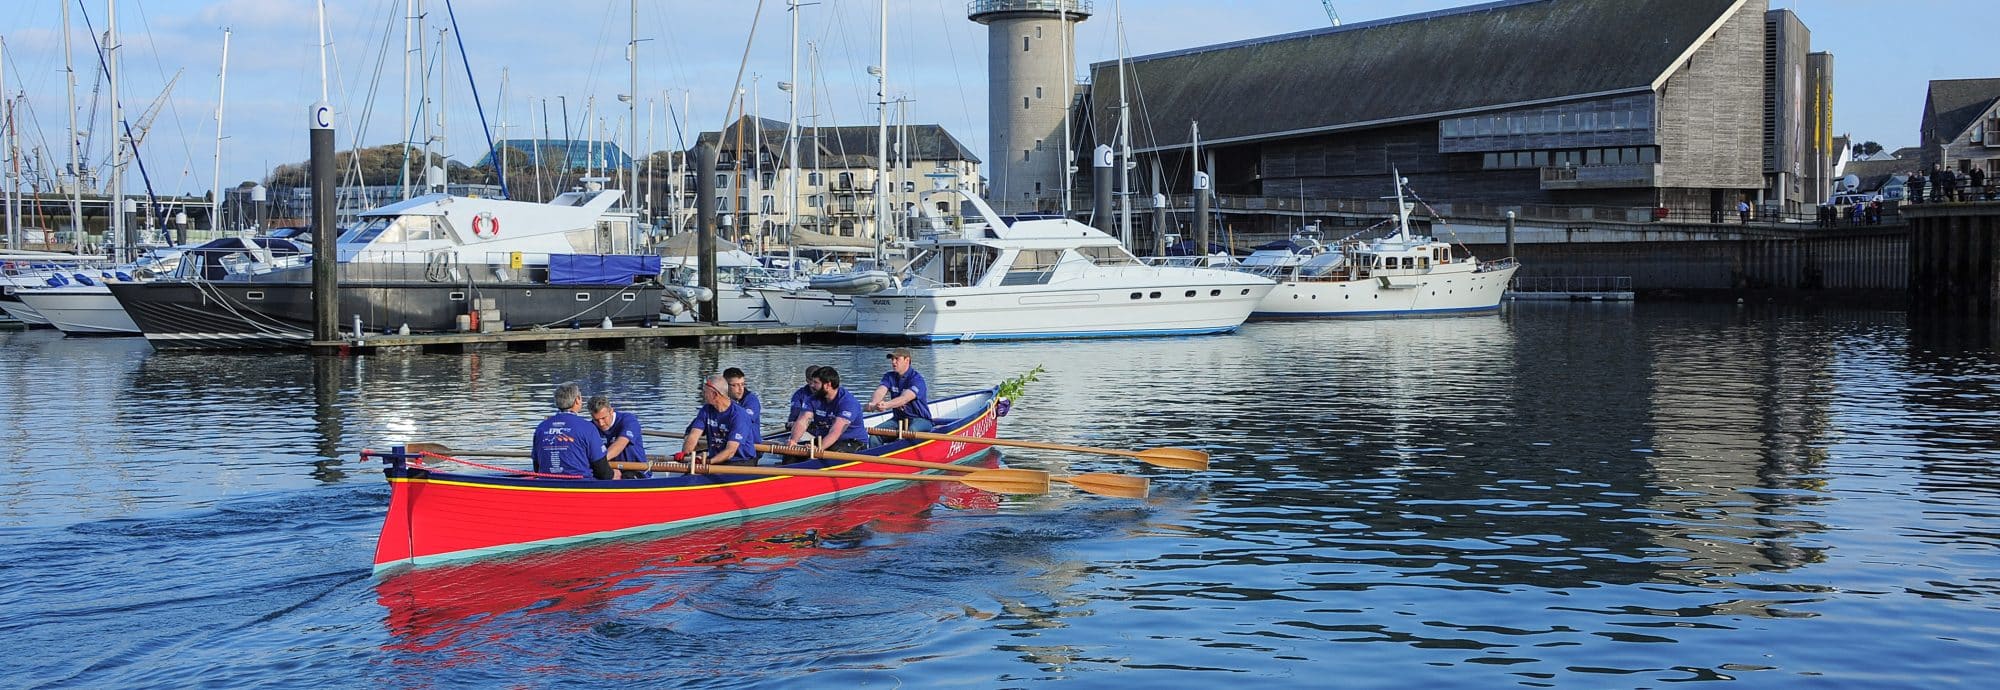 A photo of the 'Valiant' being rowed past Falmouth marina towards the Museum.